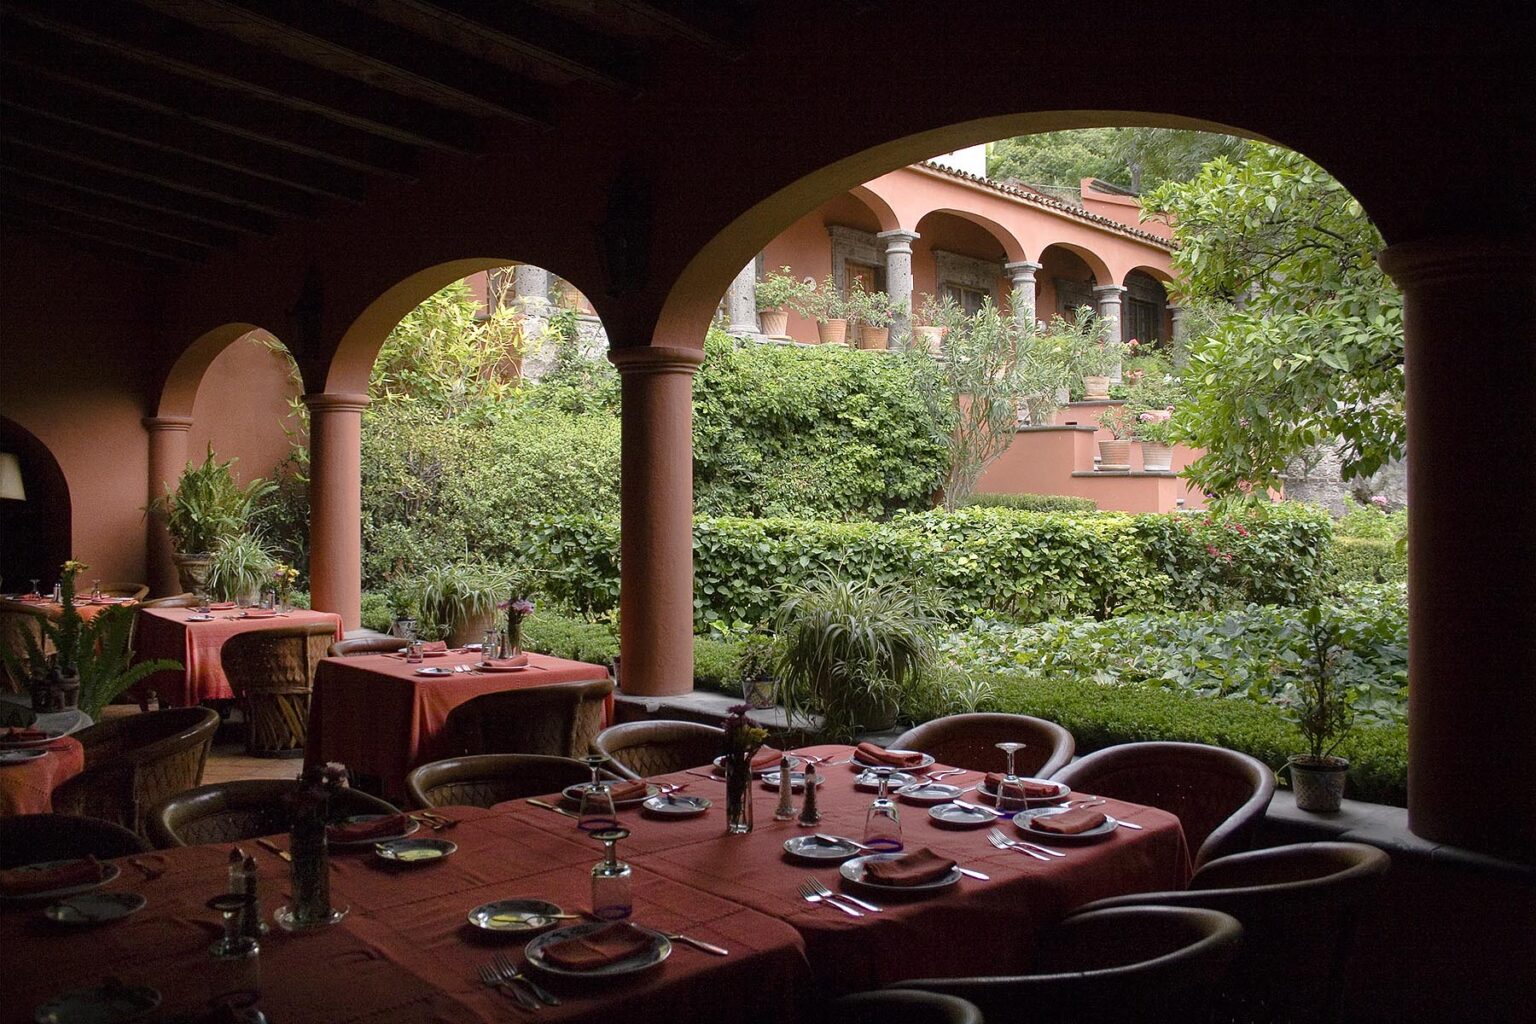 Restaurant dining area in the Sierra Nevada hotel, one of the finest in San Miguel de Allende - MEXICO